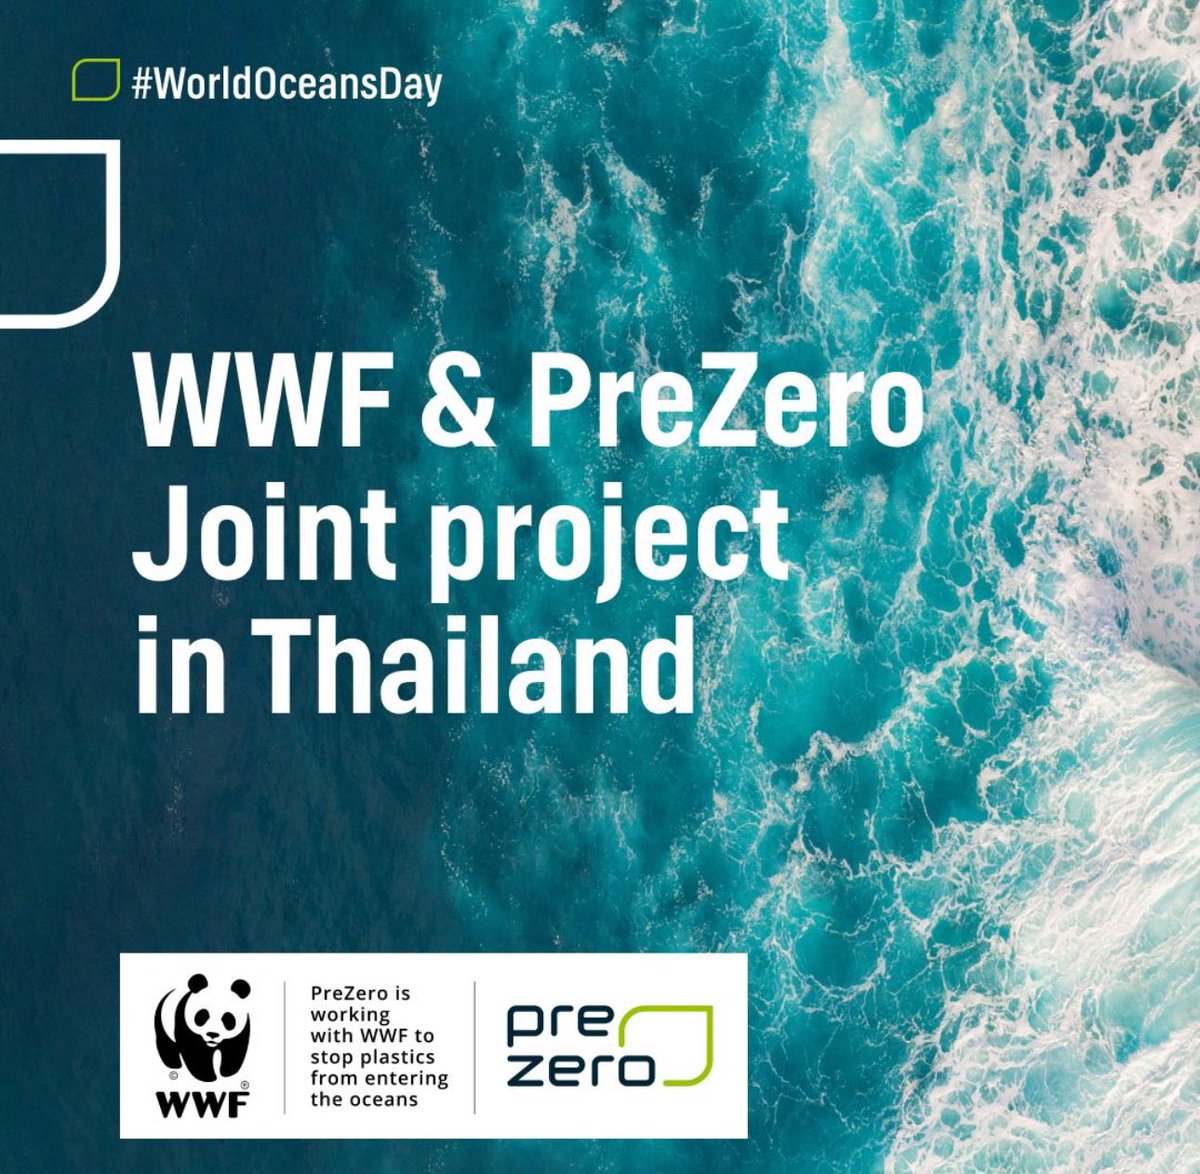 #WorldOceansDay working from the Netherlands, we support this project. #stopplastic ☀️🐬🐟🌊🪸 @PreZero_NL